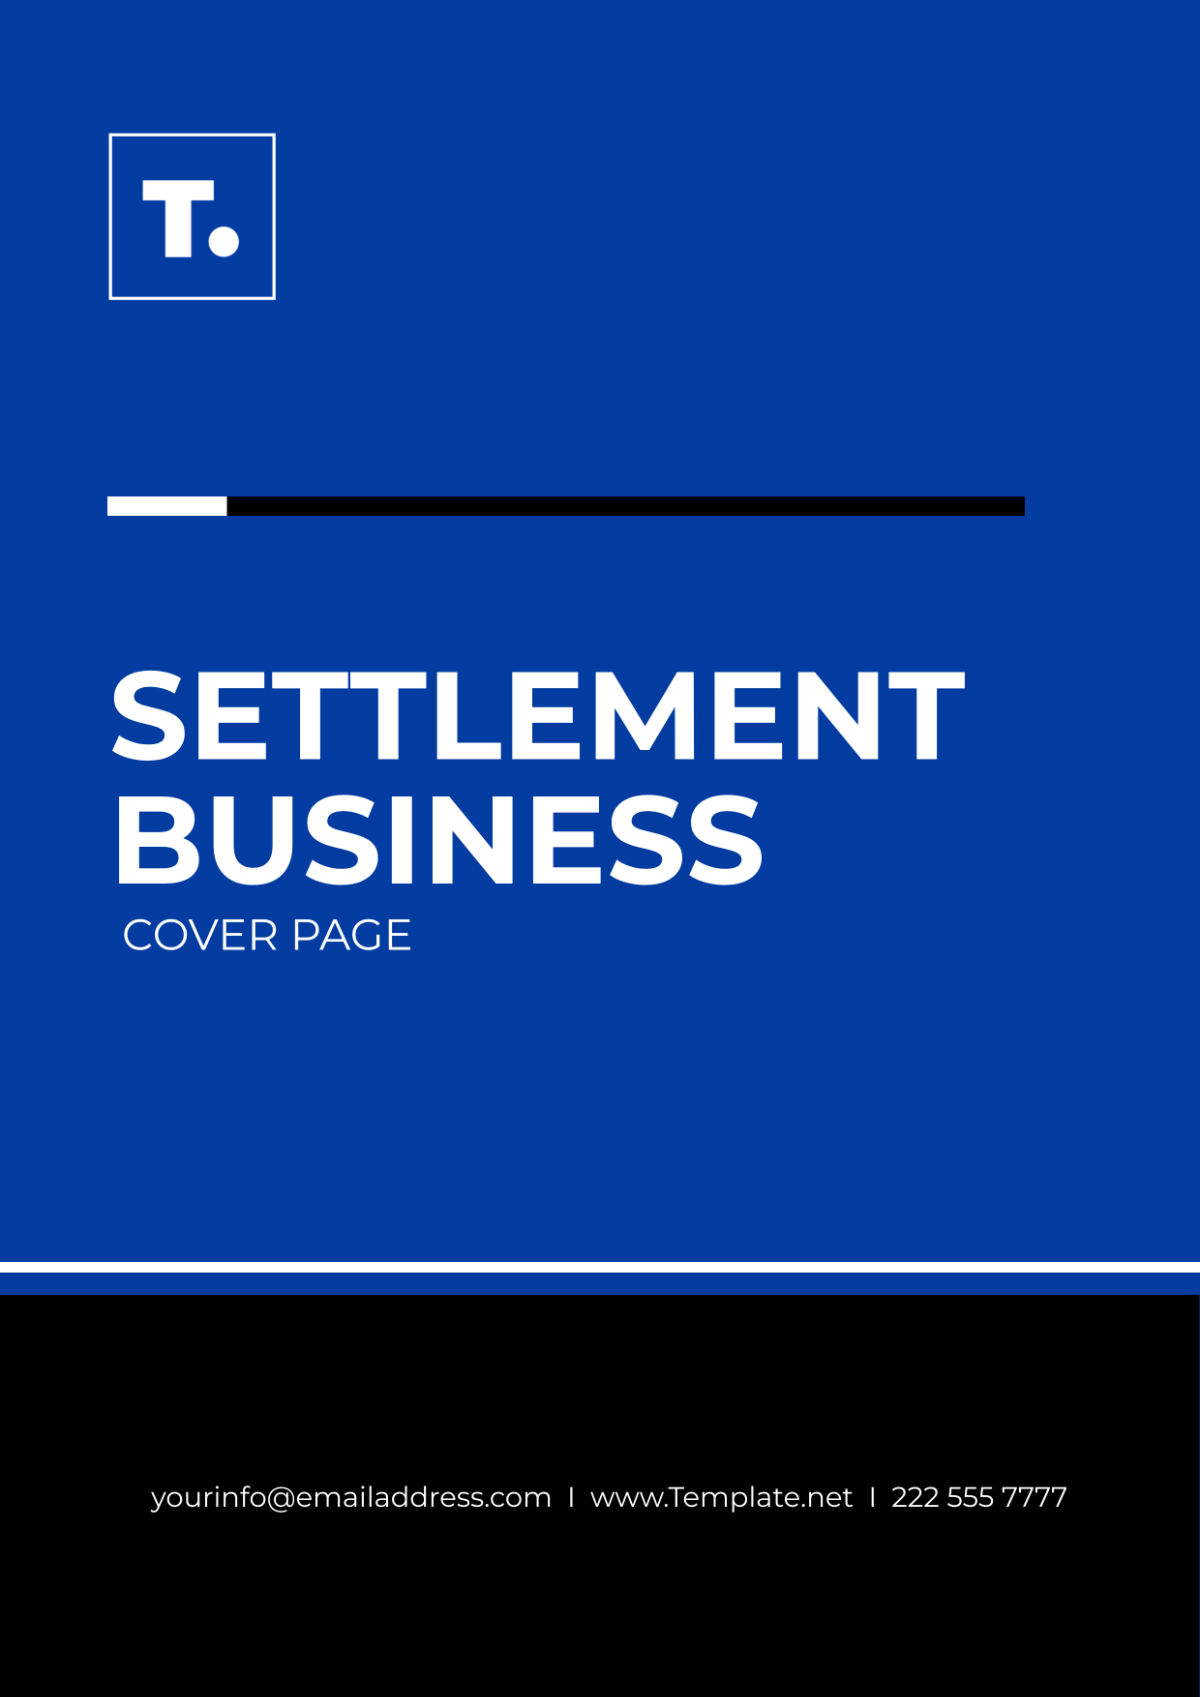 Settlement Business Cover Page